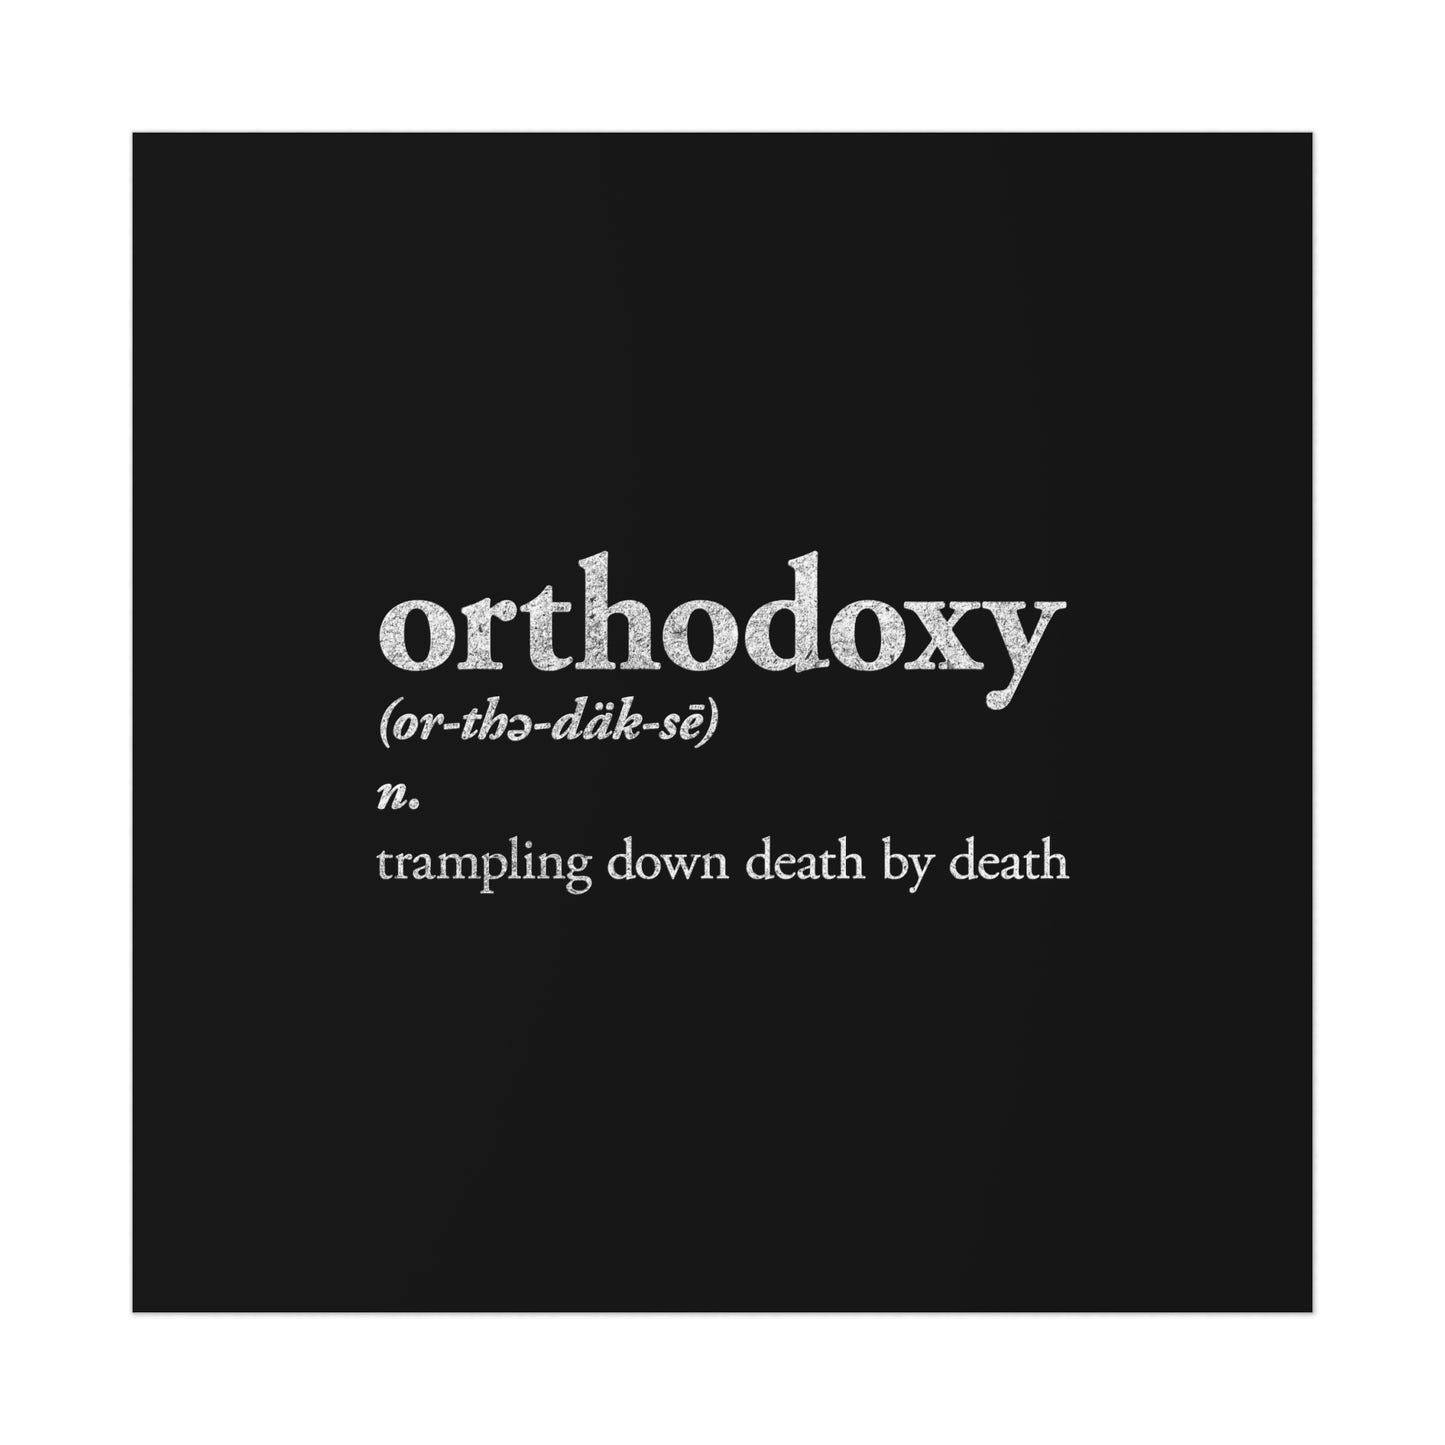 Orthodoxy Definition No. 1 (Trampling Down Death By Death) | Orthodox Christian Art Poster